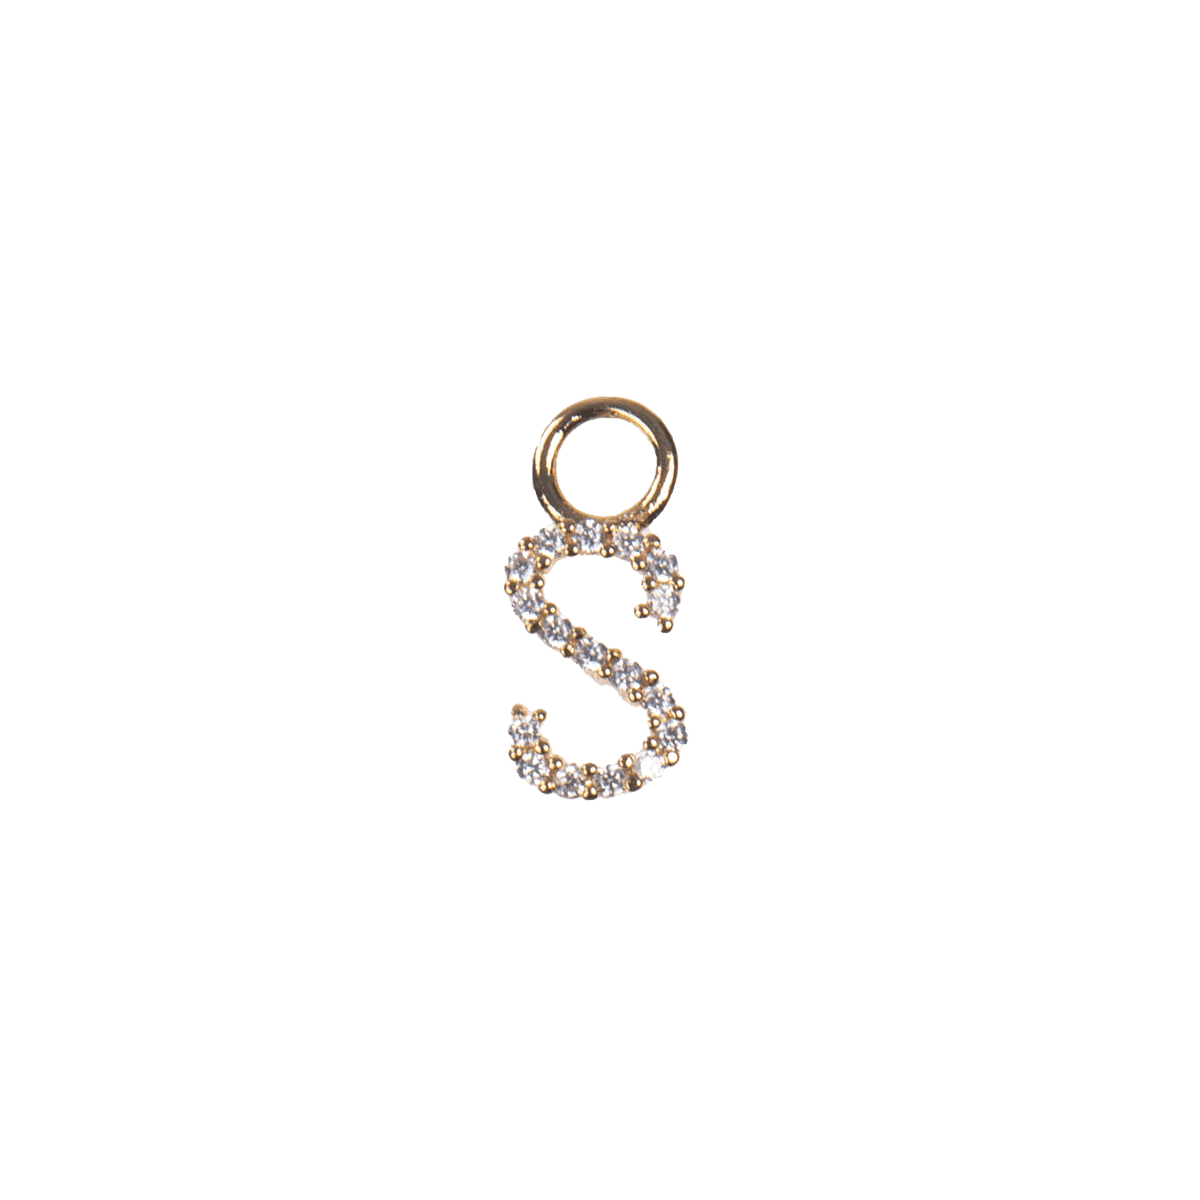 Shop Charms and Unique Fine Jewelry Collections at Shane Co.